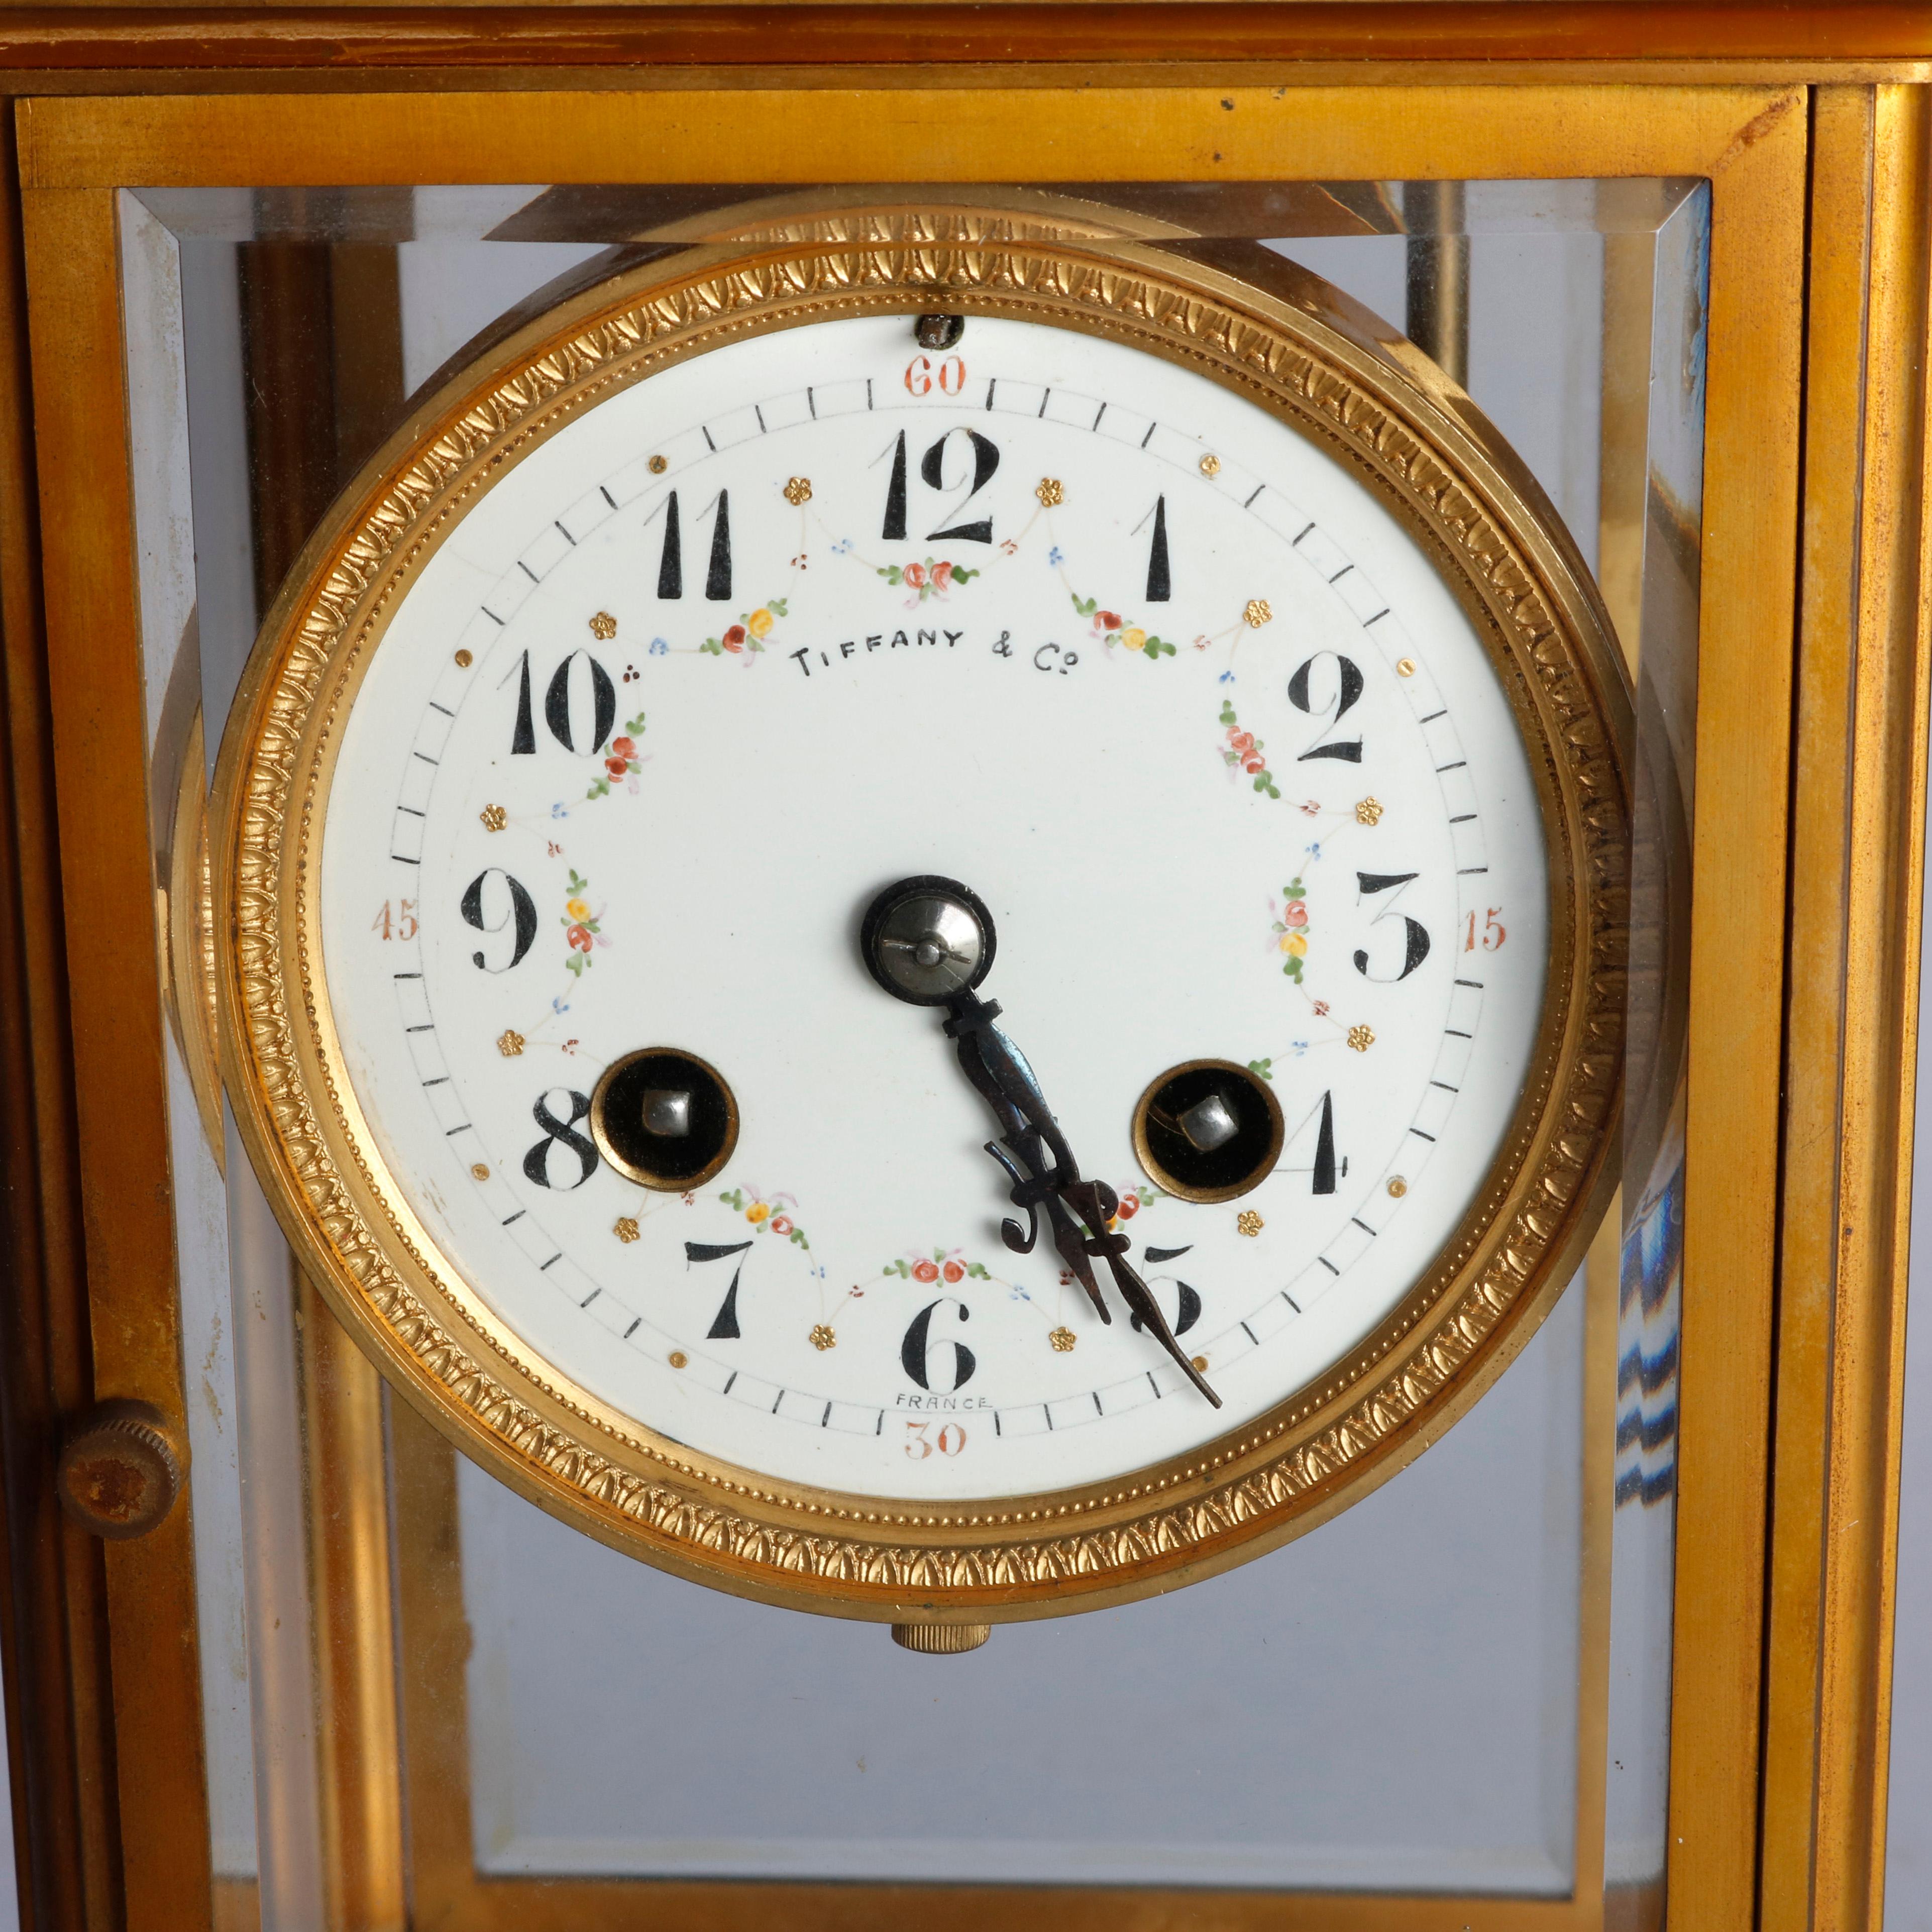 An antique crystal regulator mantel clock by Tiffany & Co. offers case having brass and beveled crystal case raised on bracket feet, works with porcelain face having Arabic numbers and floral garland highlights, signed as photographed and inscribed